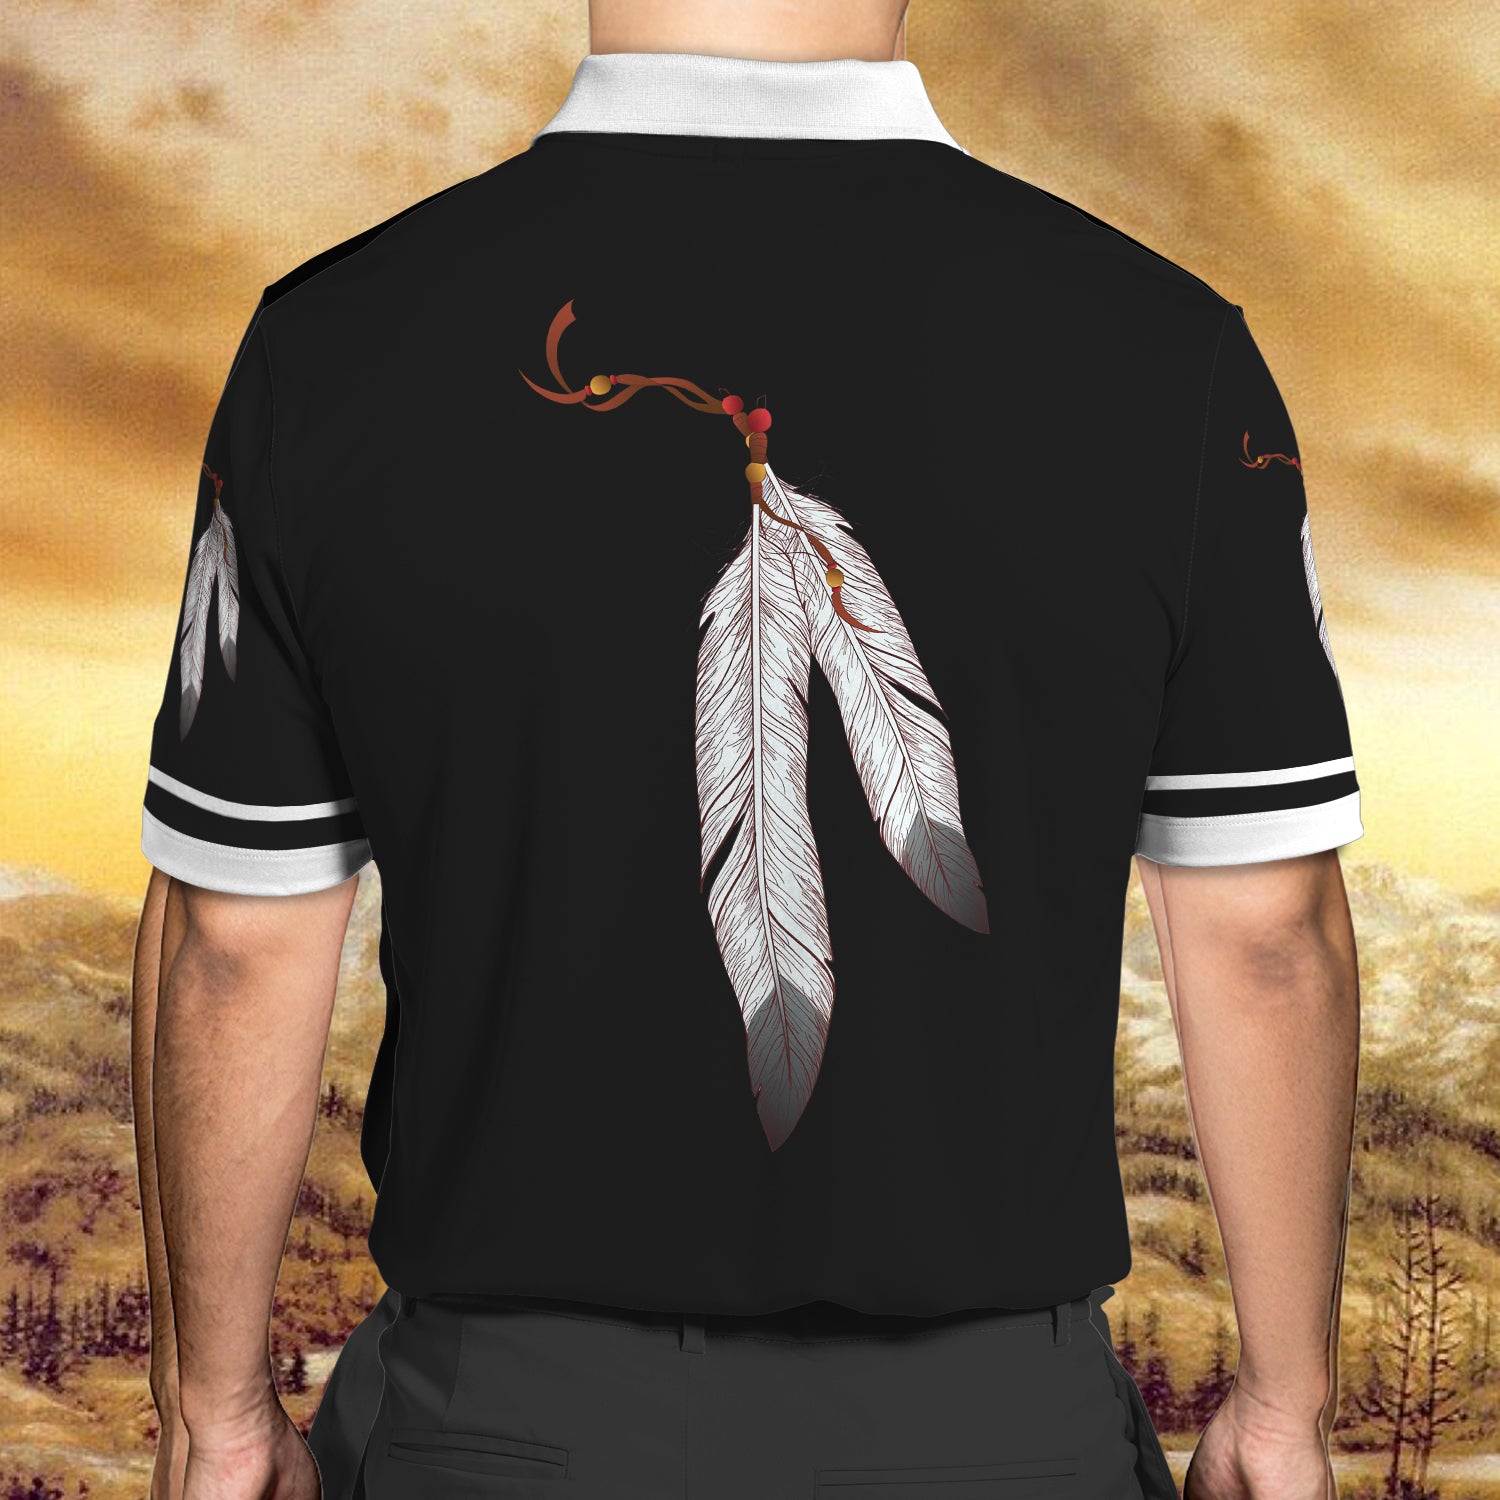 nnta - Personalized Name - 3D Polo Shirt - NATIVE